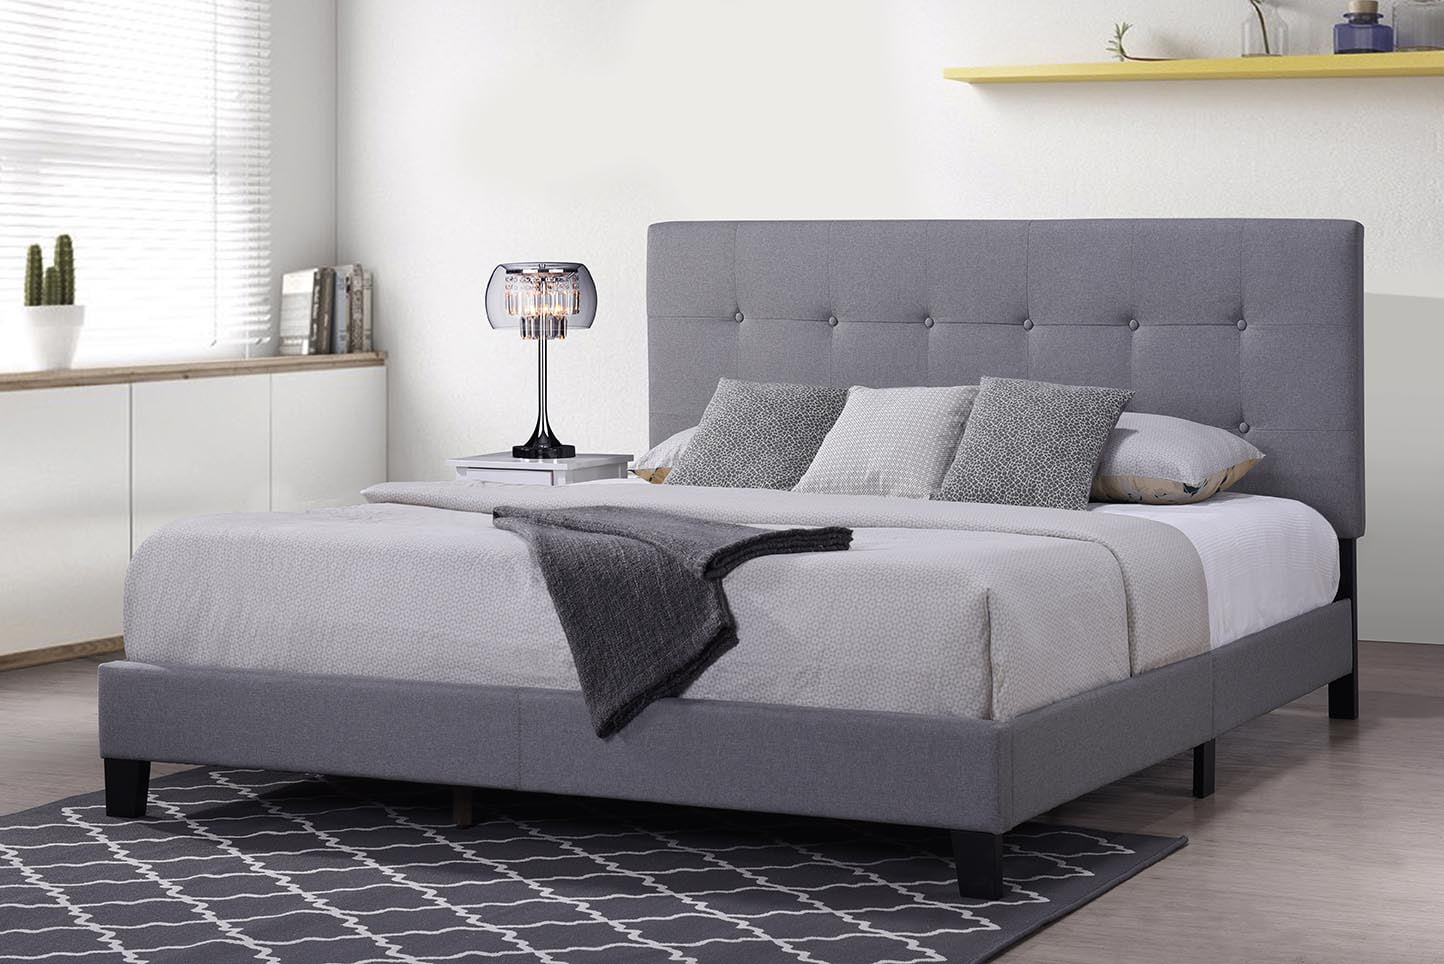 Clearance! Upholstered Platform Bed Frame, Heavy Duty Wood ...